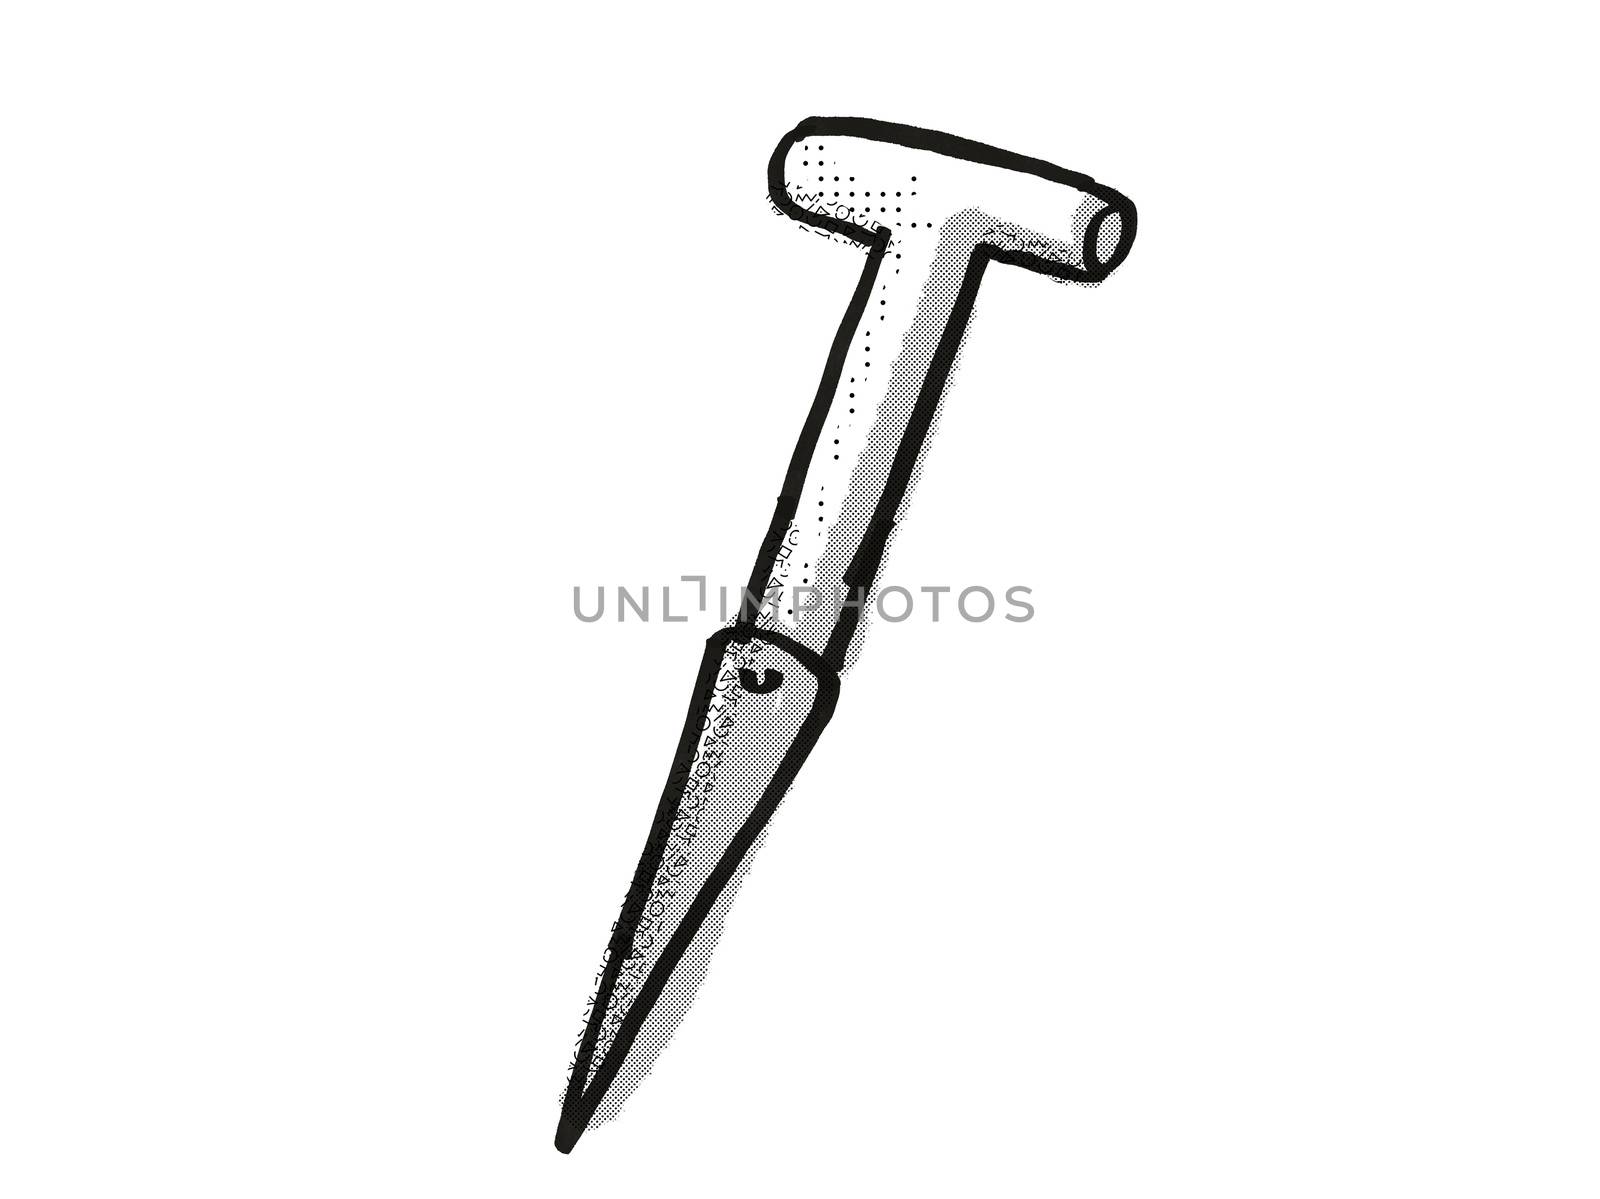 Retro cartoon style drawing of a dibber, dibble or dibbler, a garden or gardening tool equipment on isolated white background done in black and white